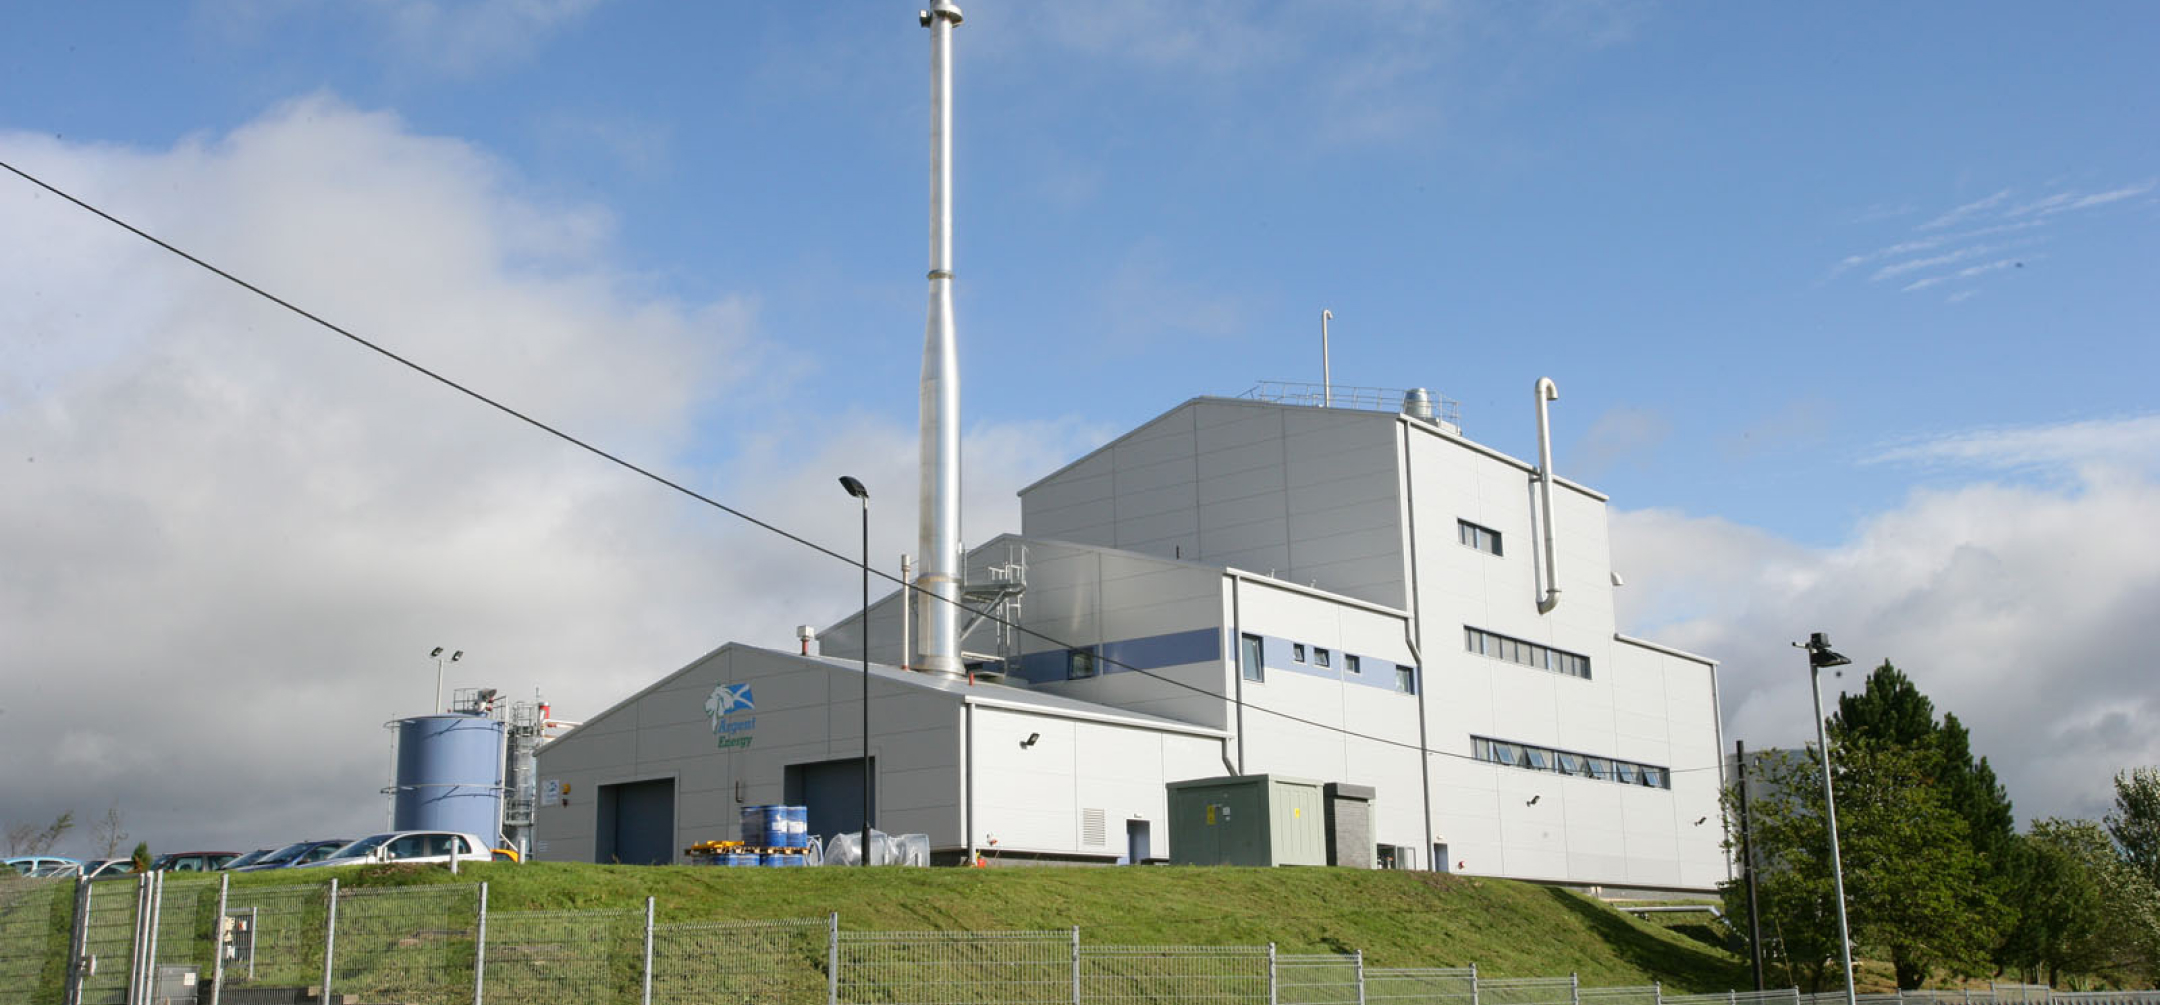 External shot of Argent energy plant in Motherwell, Scotland